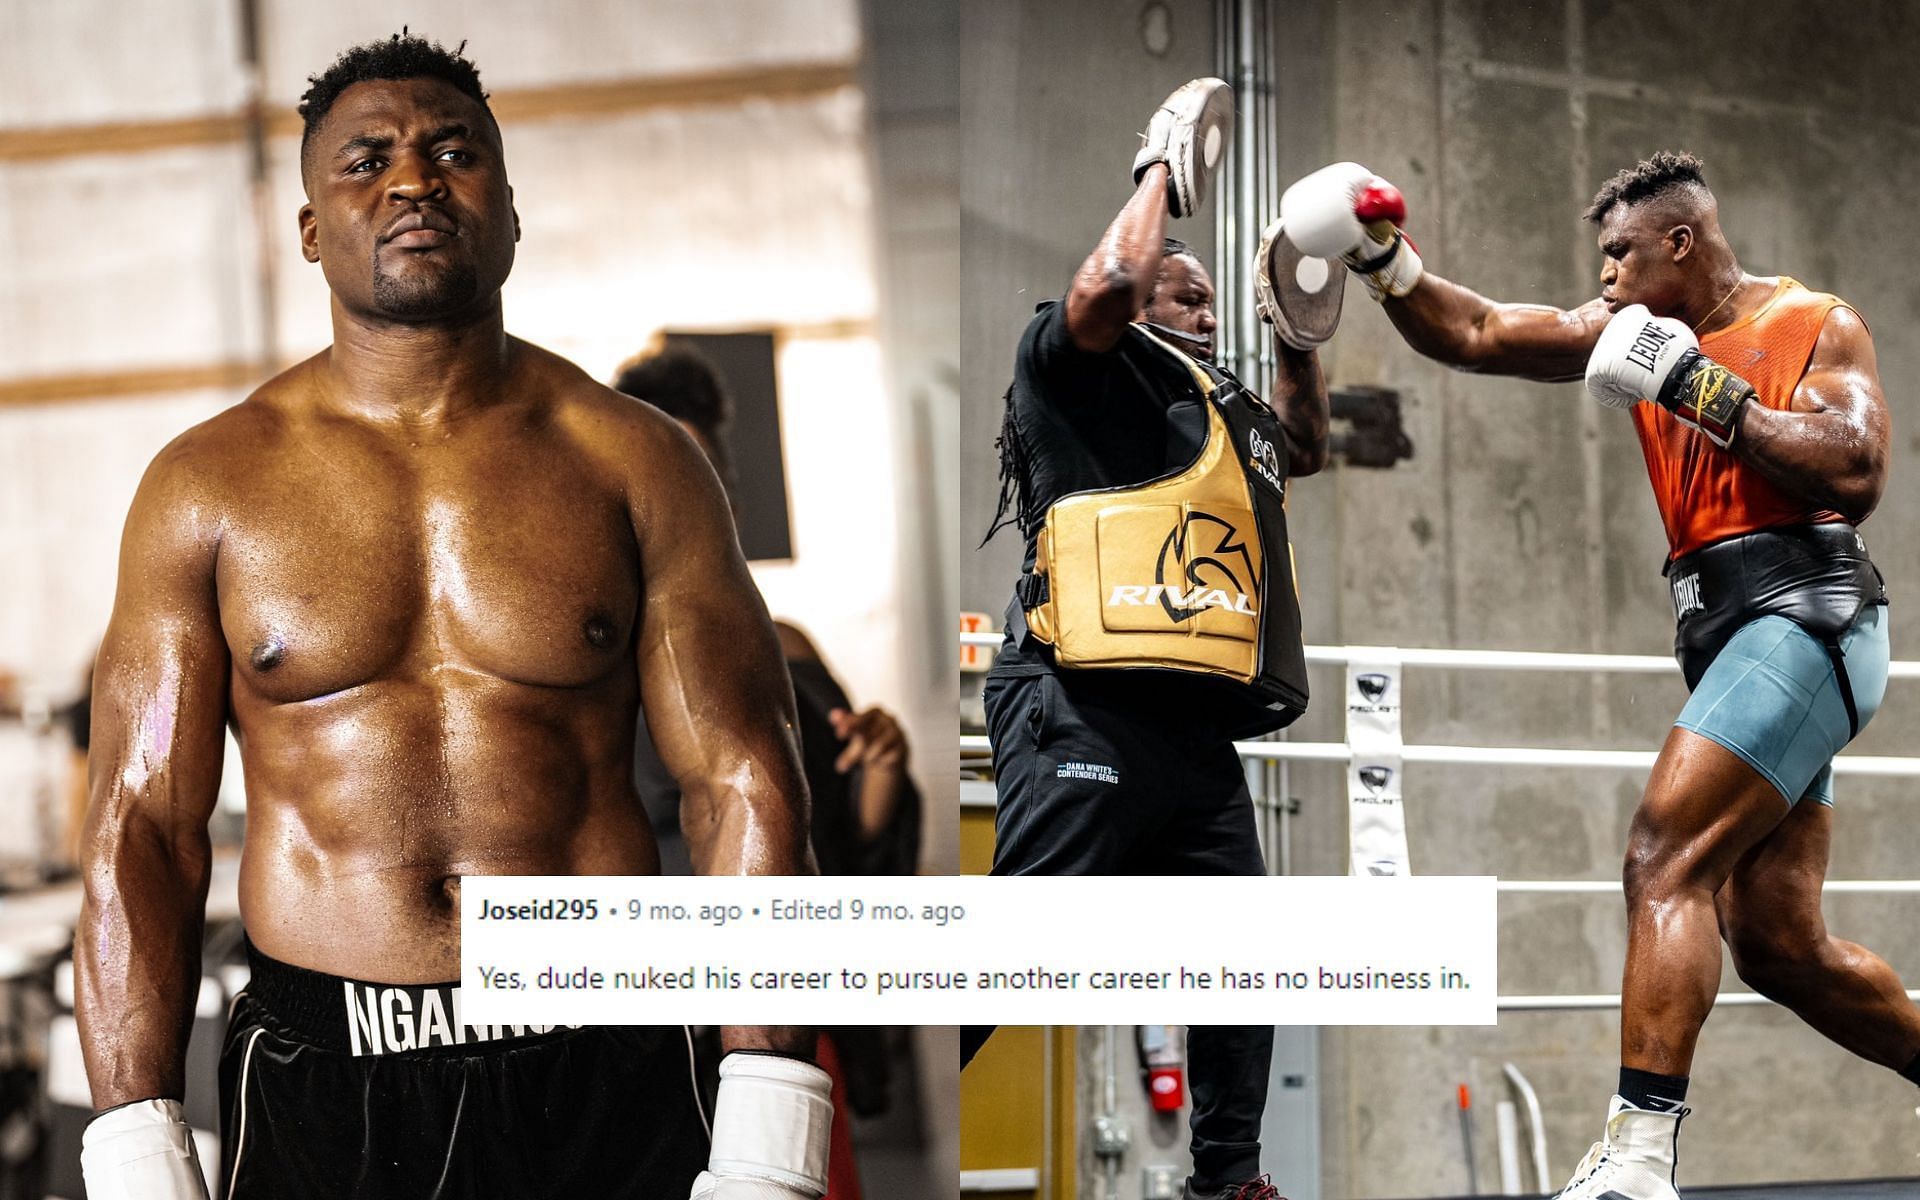 Francis Ngannnou [Pictured] was criticized following his UFC departure [Image courtesy: @francis_ngannou - X, and LimonTheNarco - Reddit]